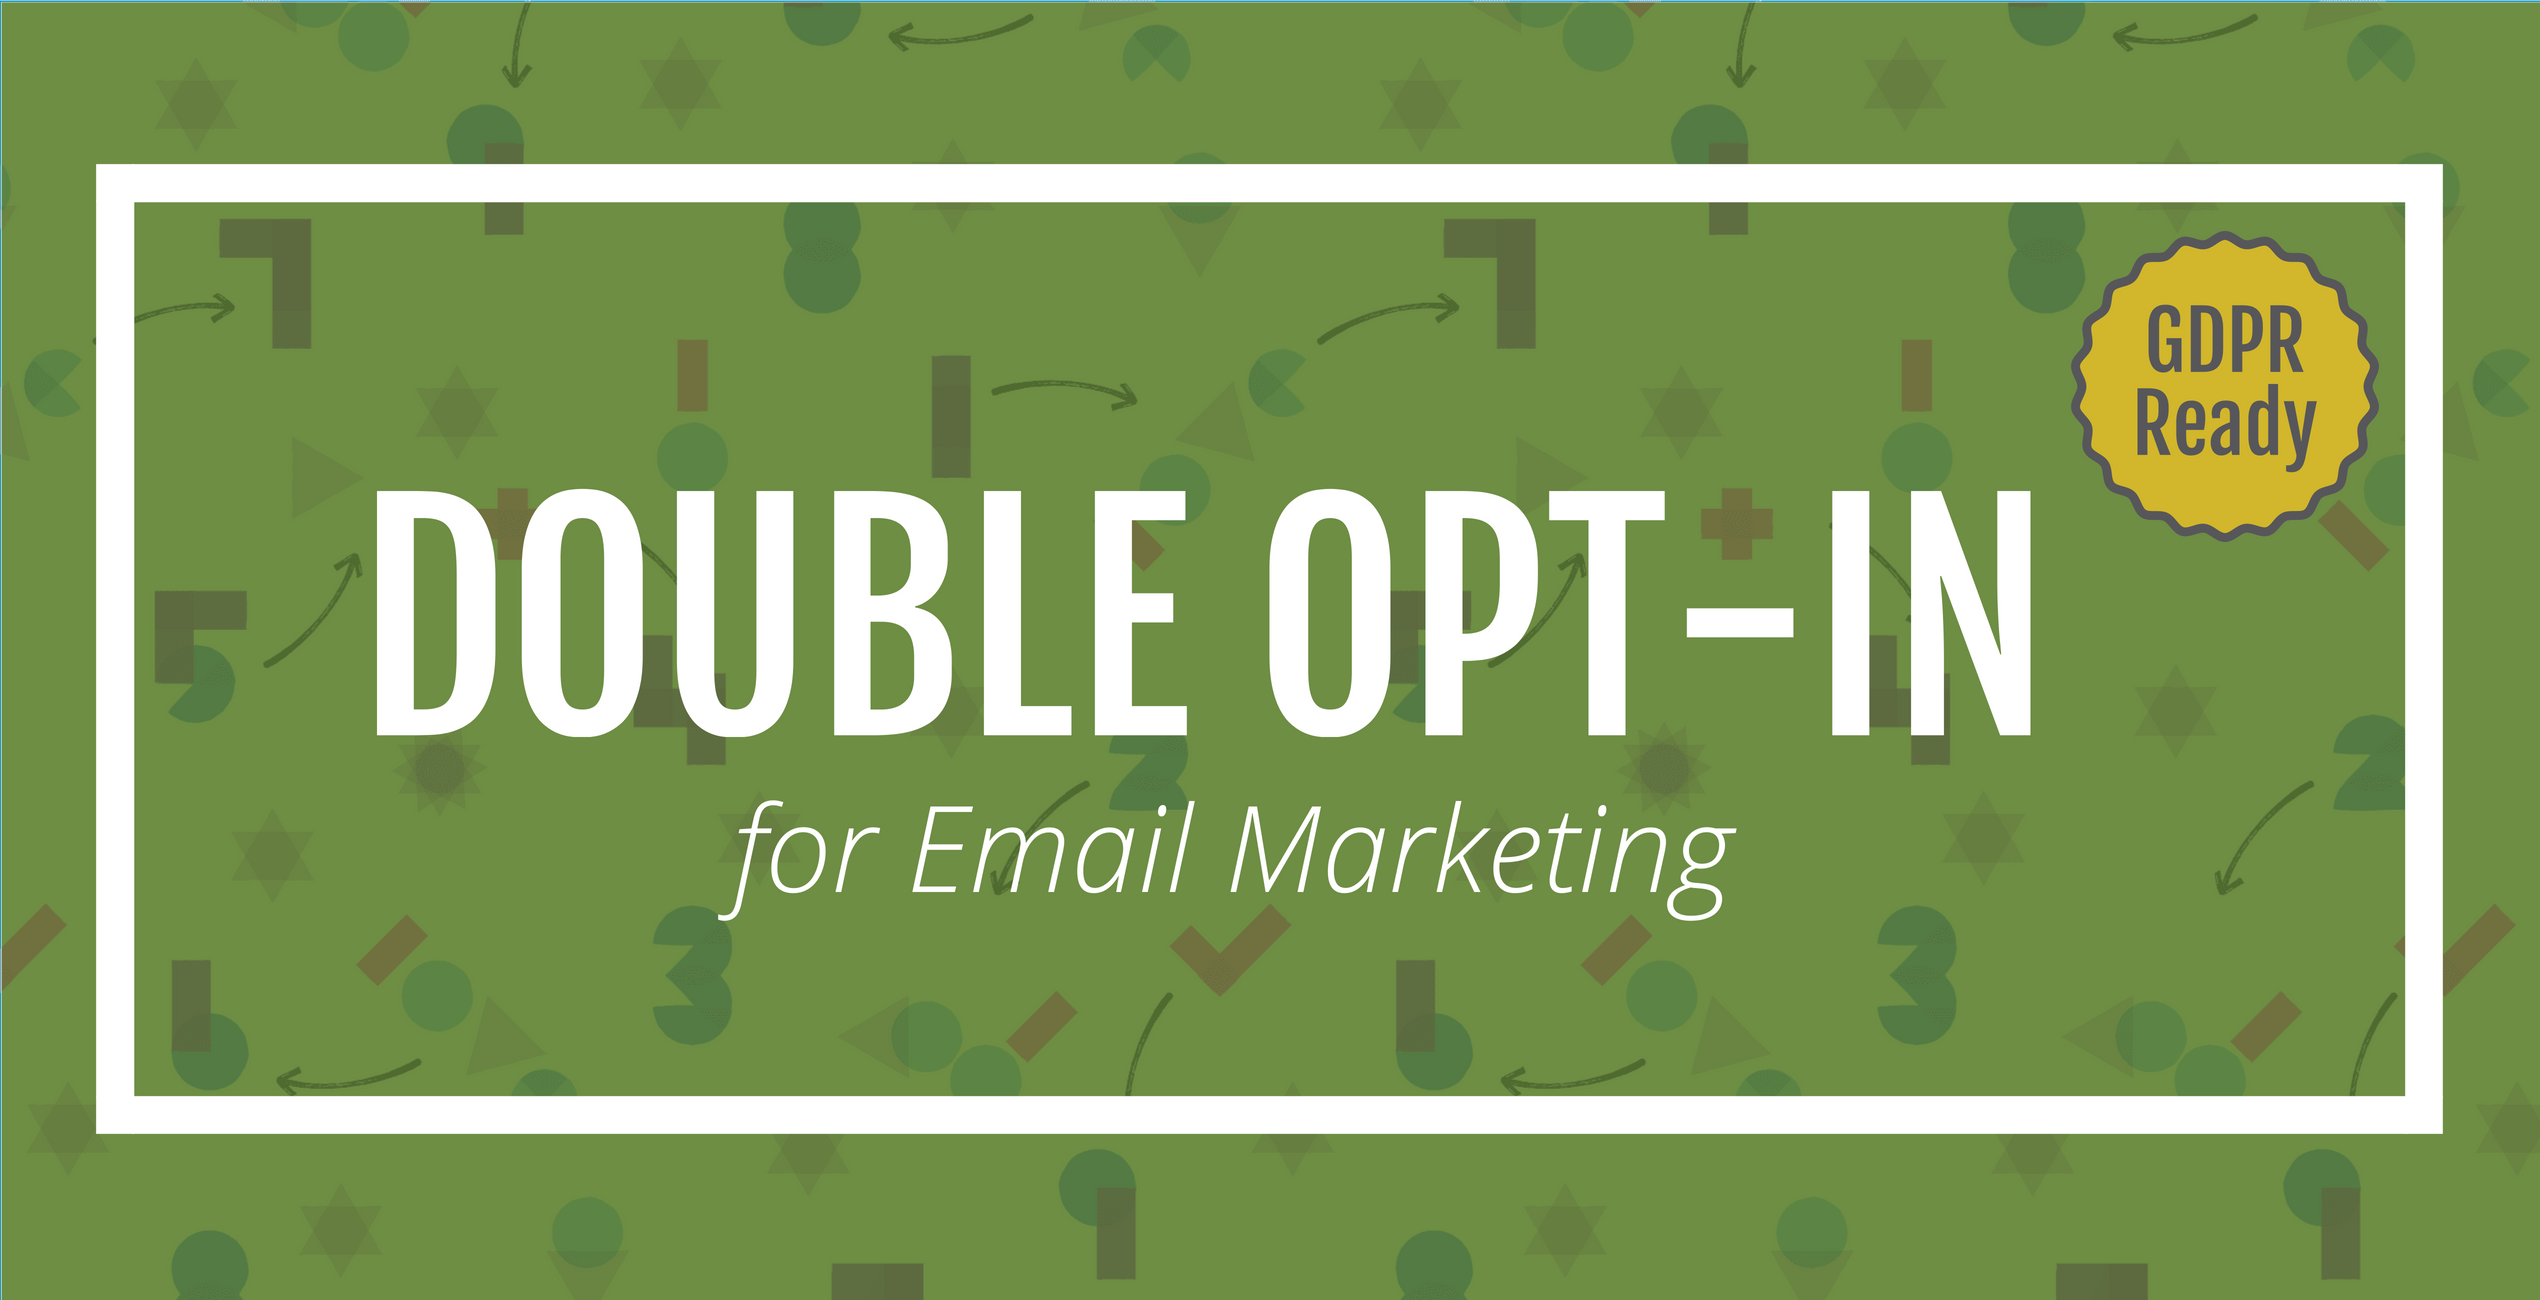 GDPR Ready: Double Opt-In for Email Marketing